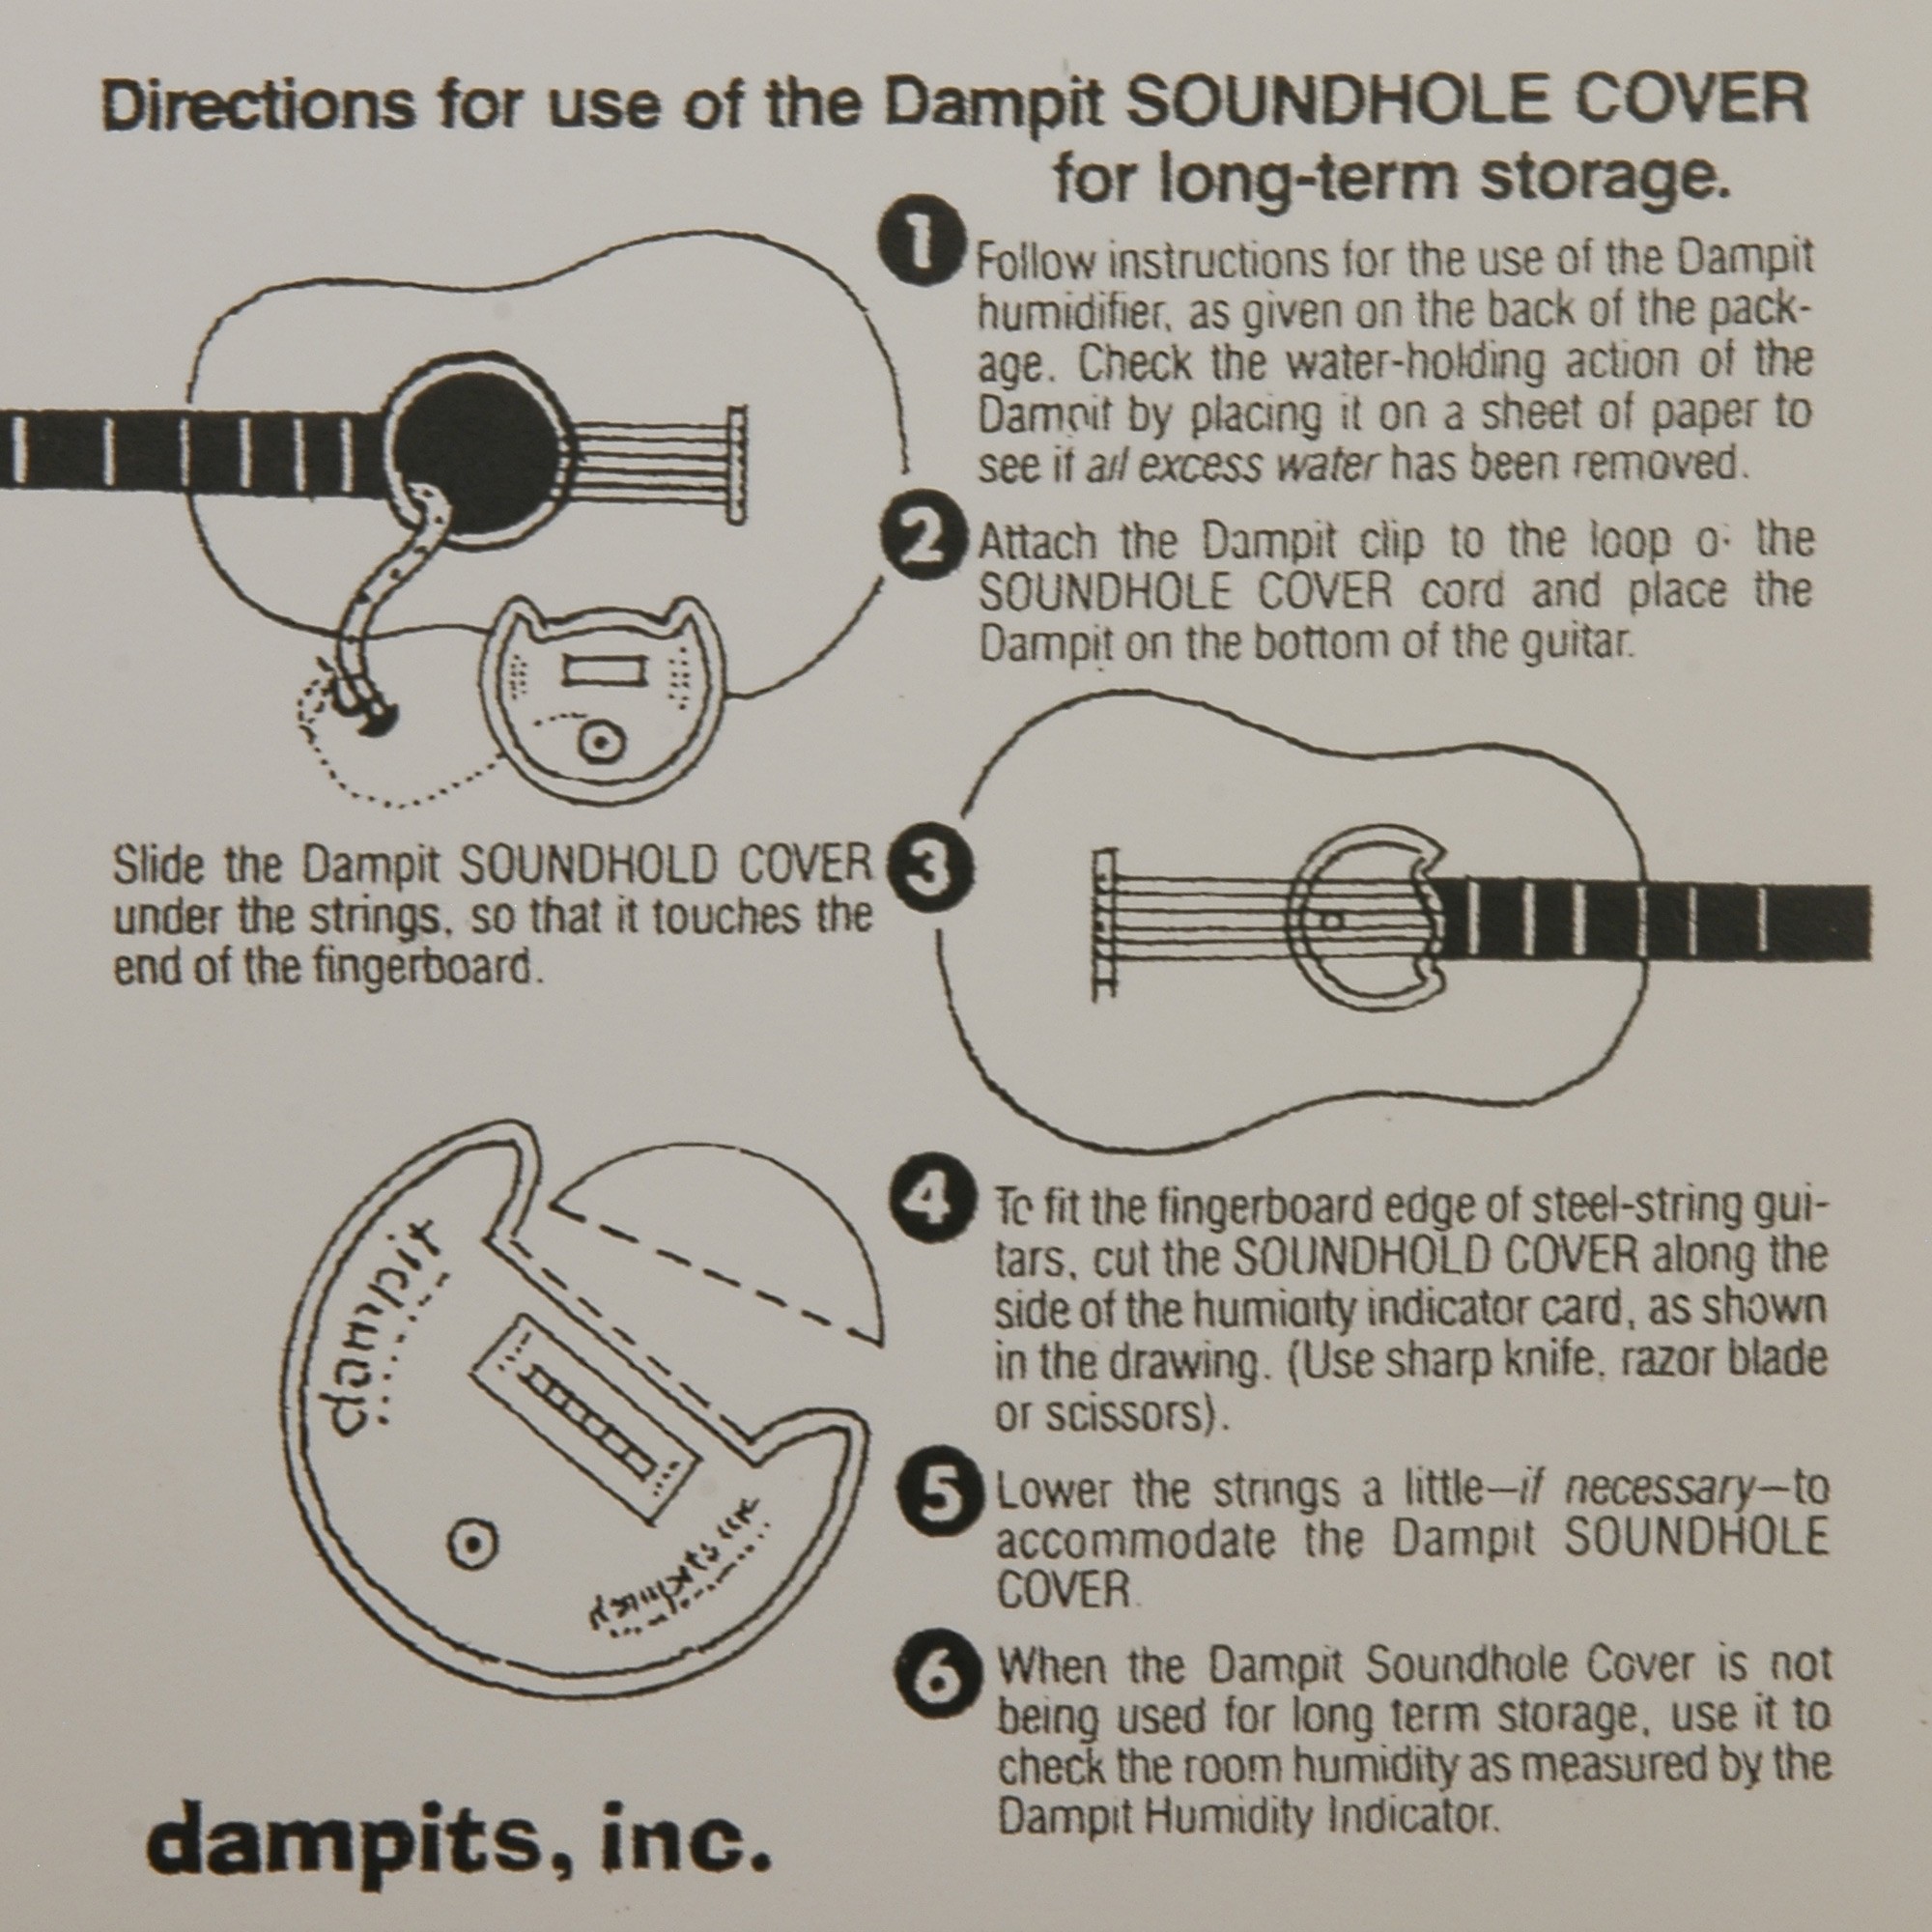 Guitar Directions For Use (included)